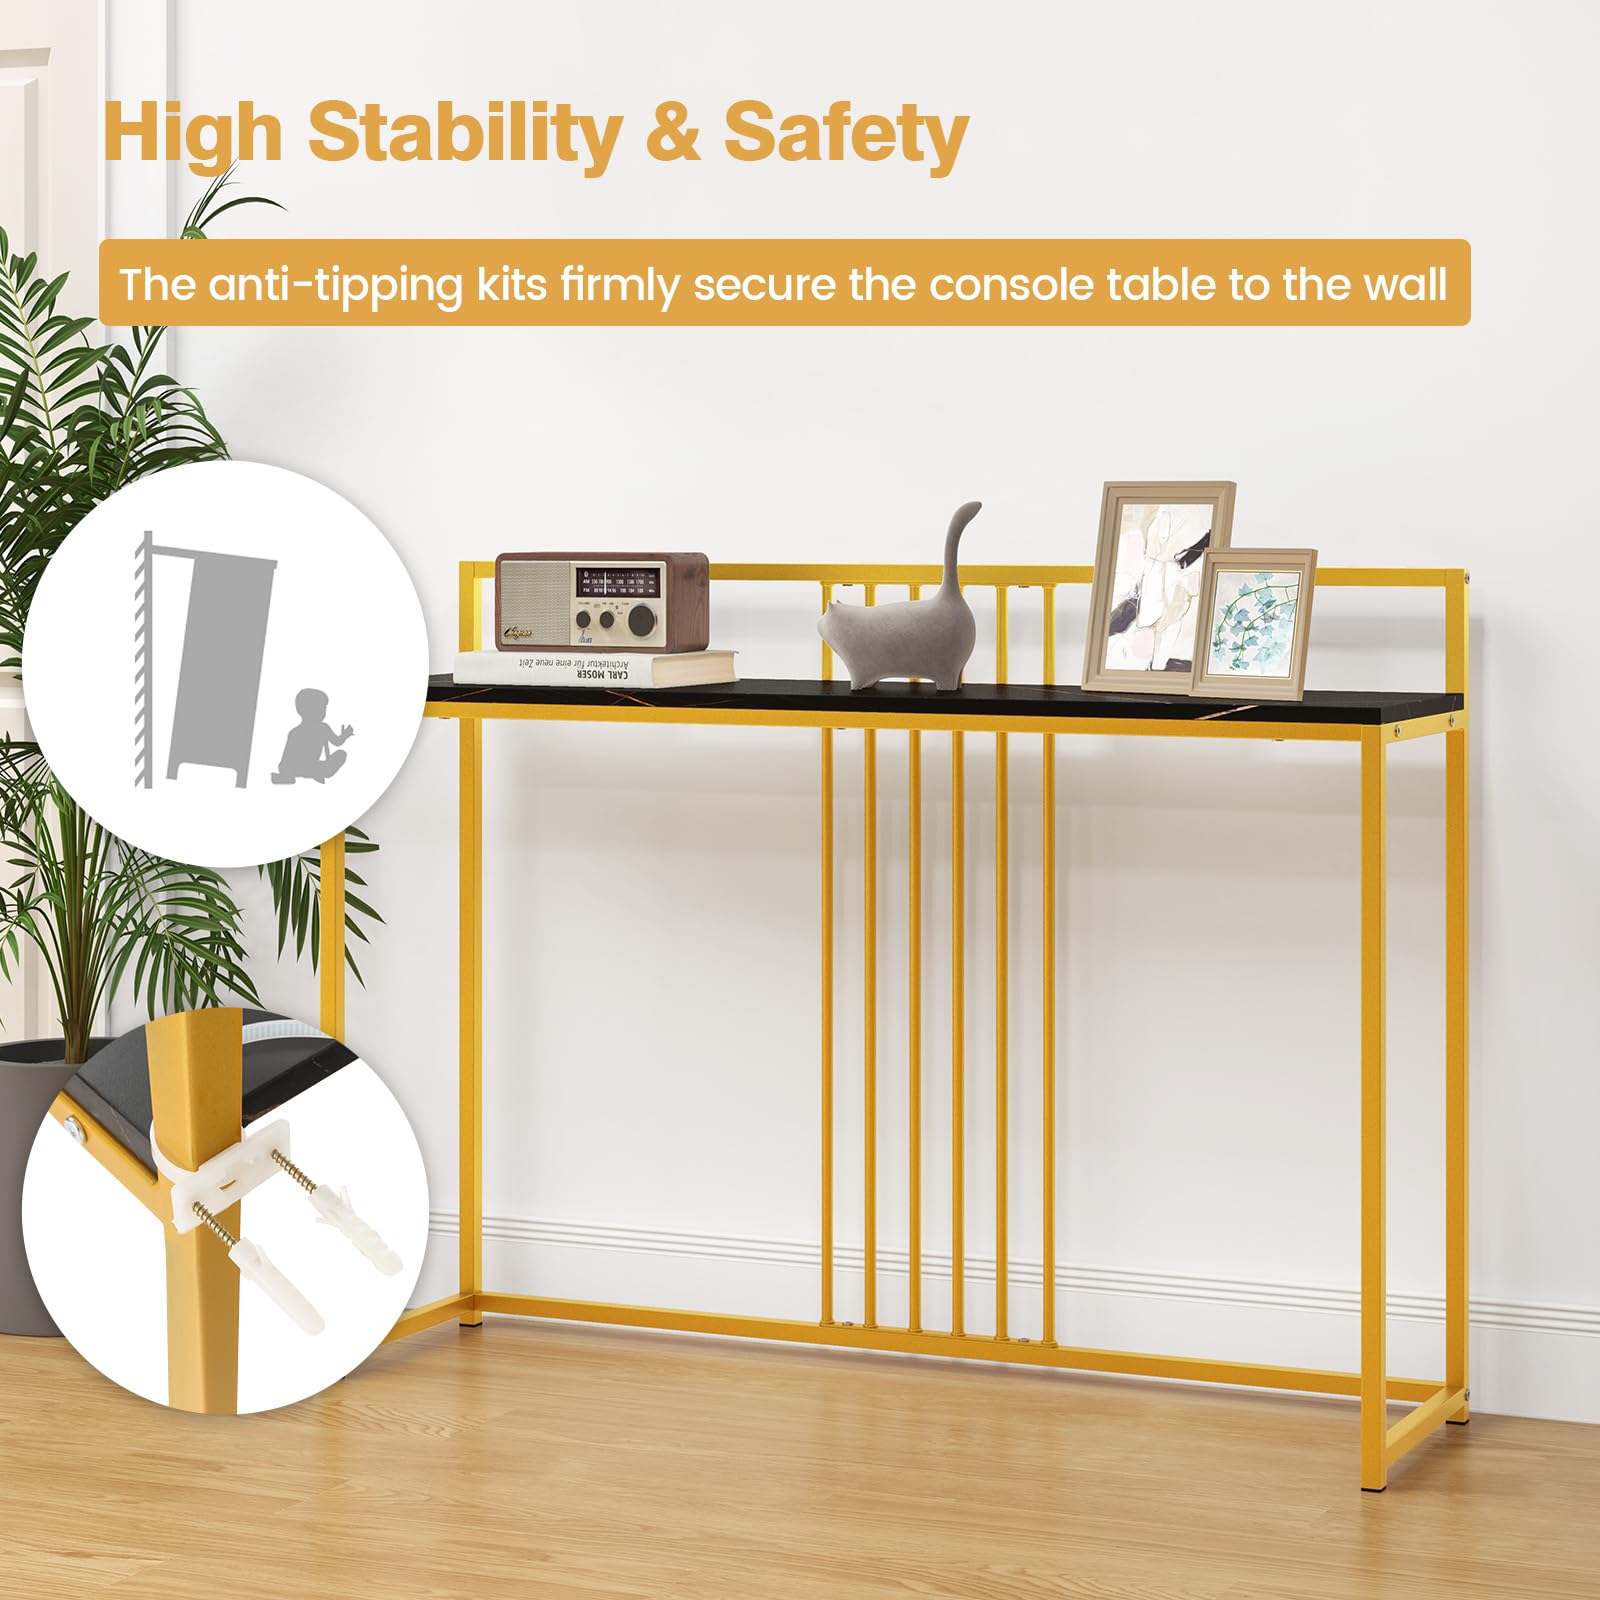 Giantex 47" Entryway Console Table - Narrow Hallway Table w/Sturdy Gold Metal Frame, Anti-Tipping Kits